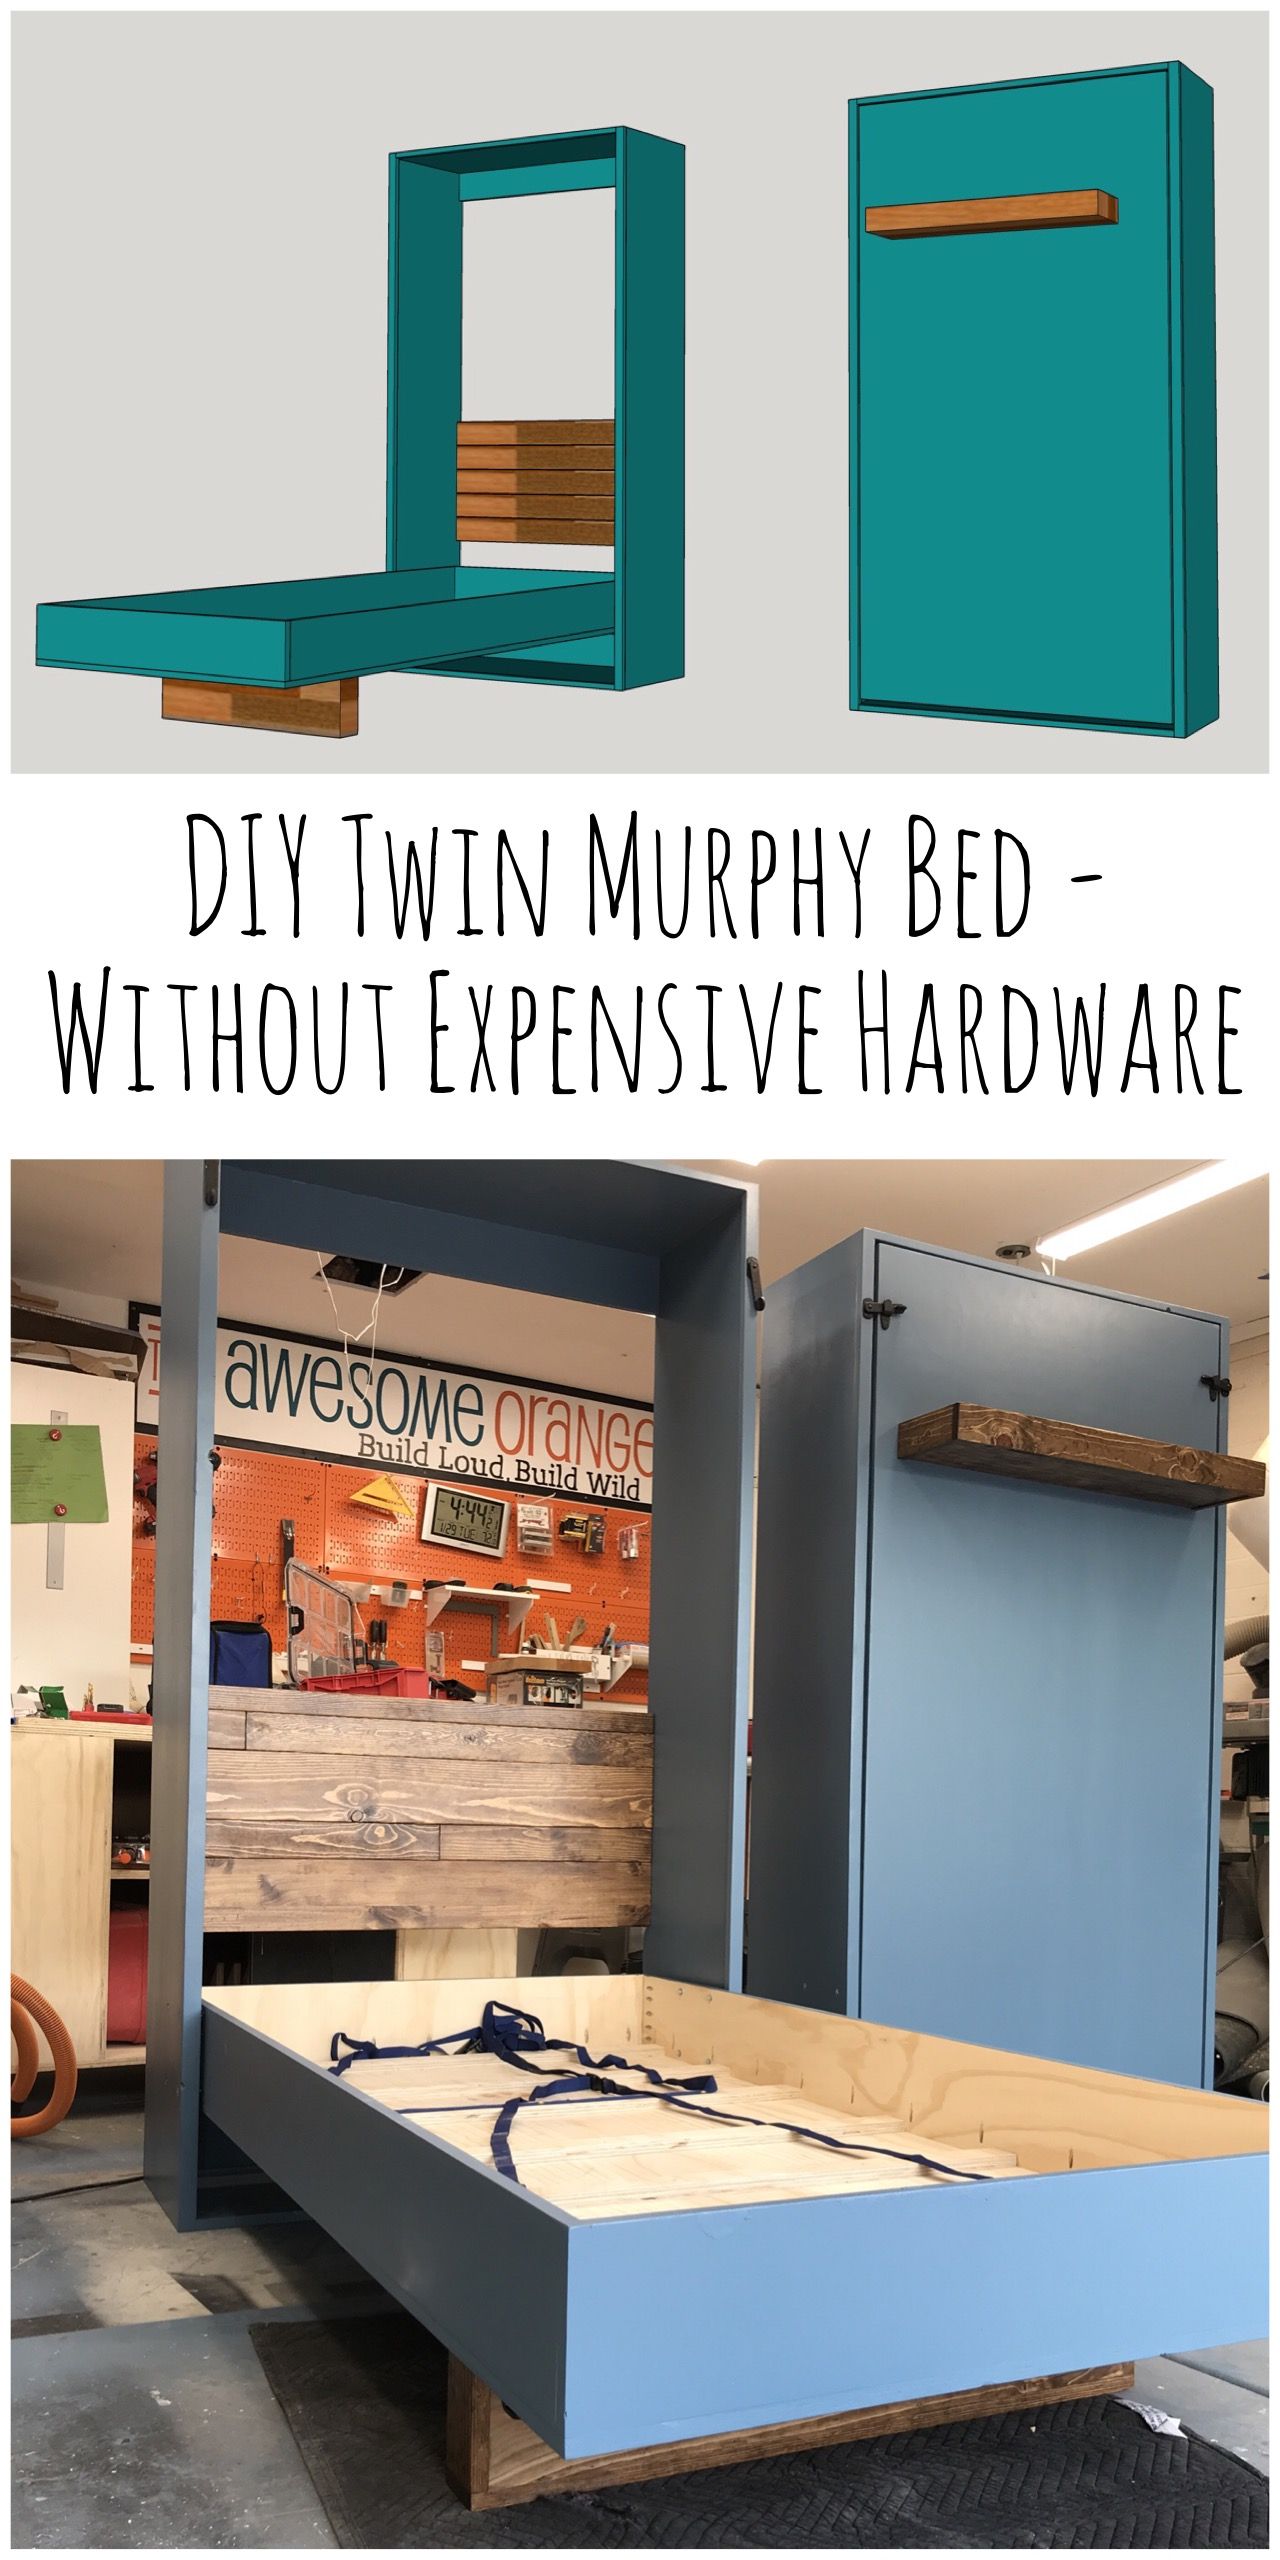 DIY Twin Murphy Beds – Without Expensive Hardware — the Awesome Orange